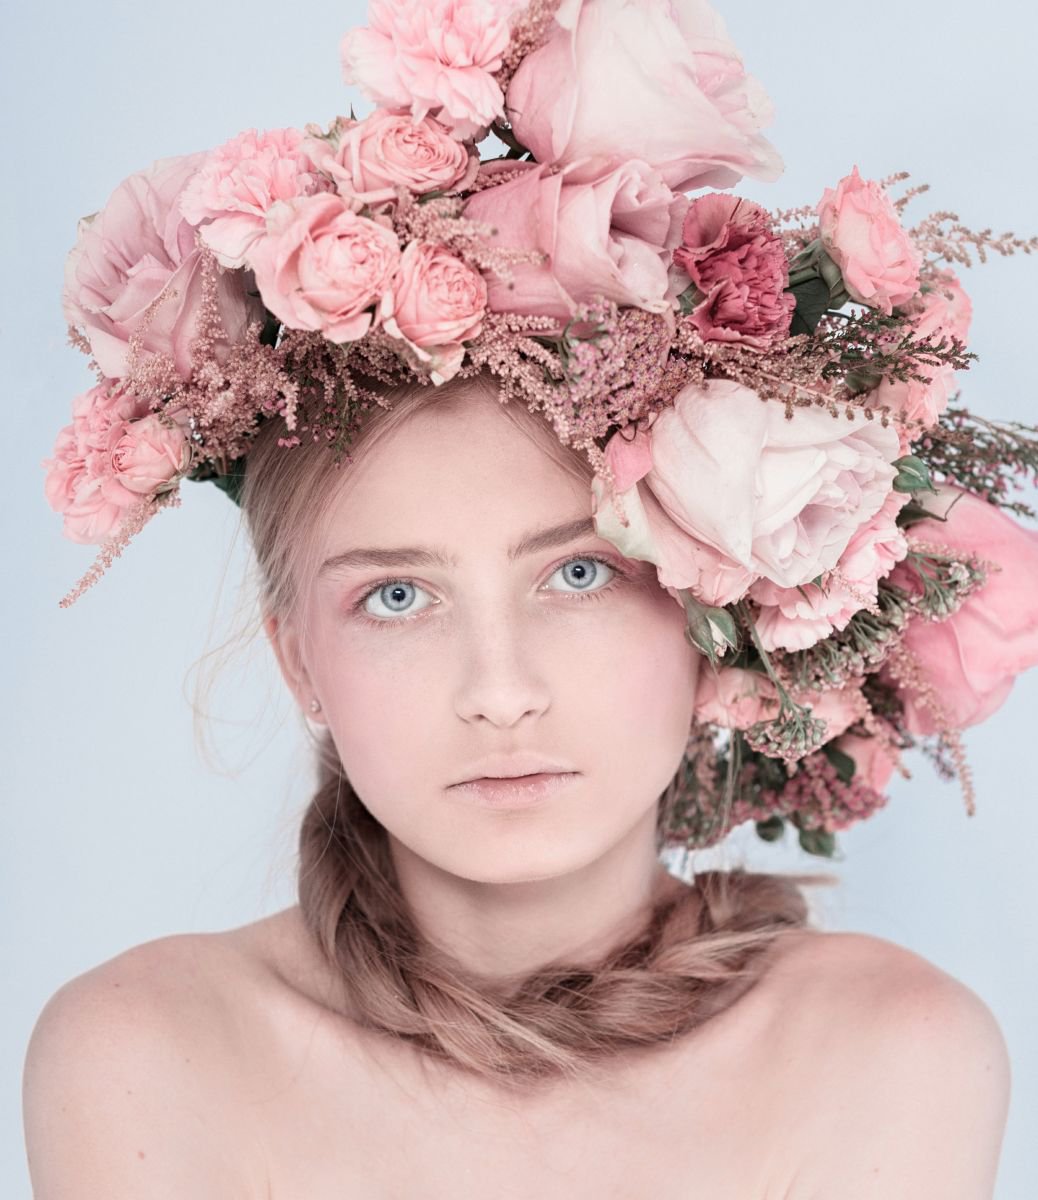 Queen of Flowers II. Limited edition 1 of 10 by Inna Mosina